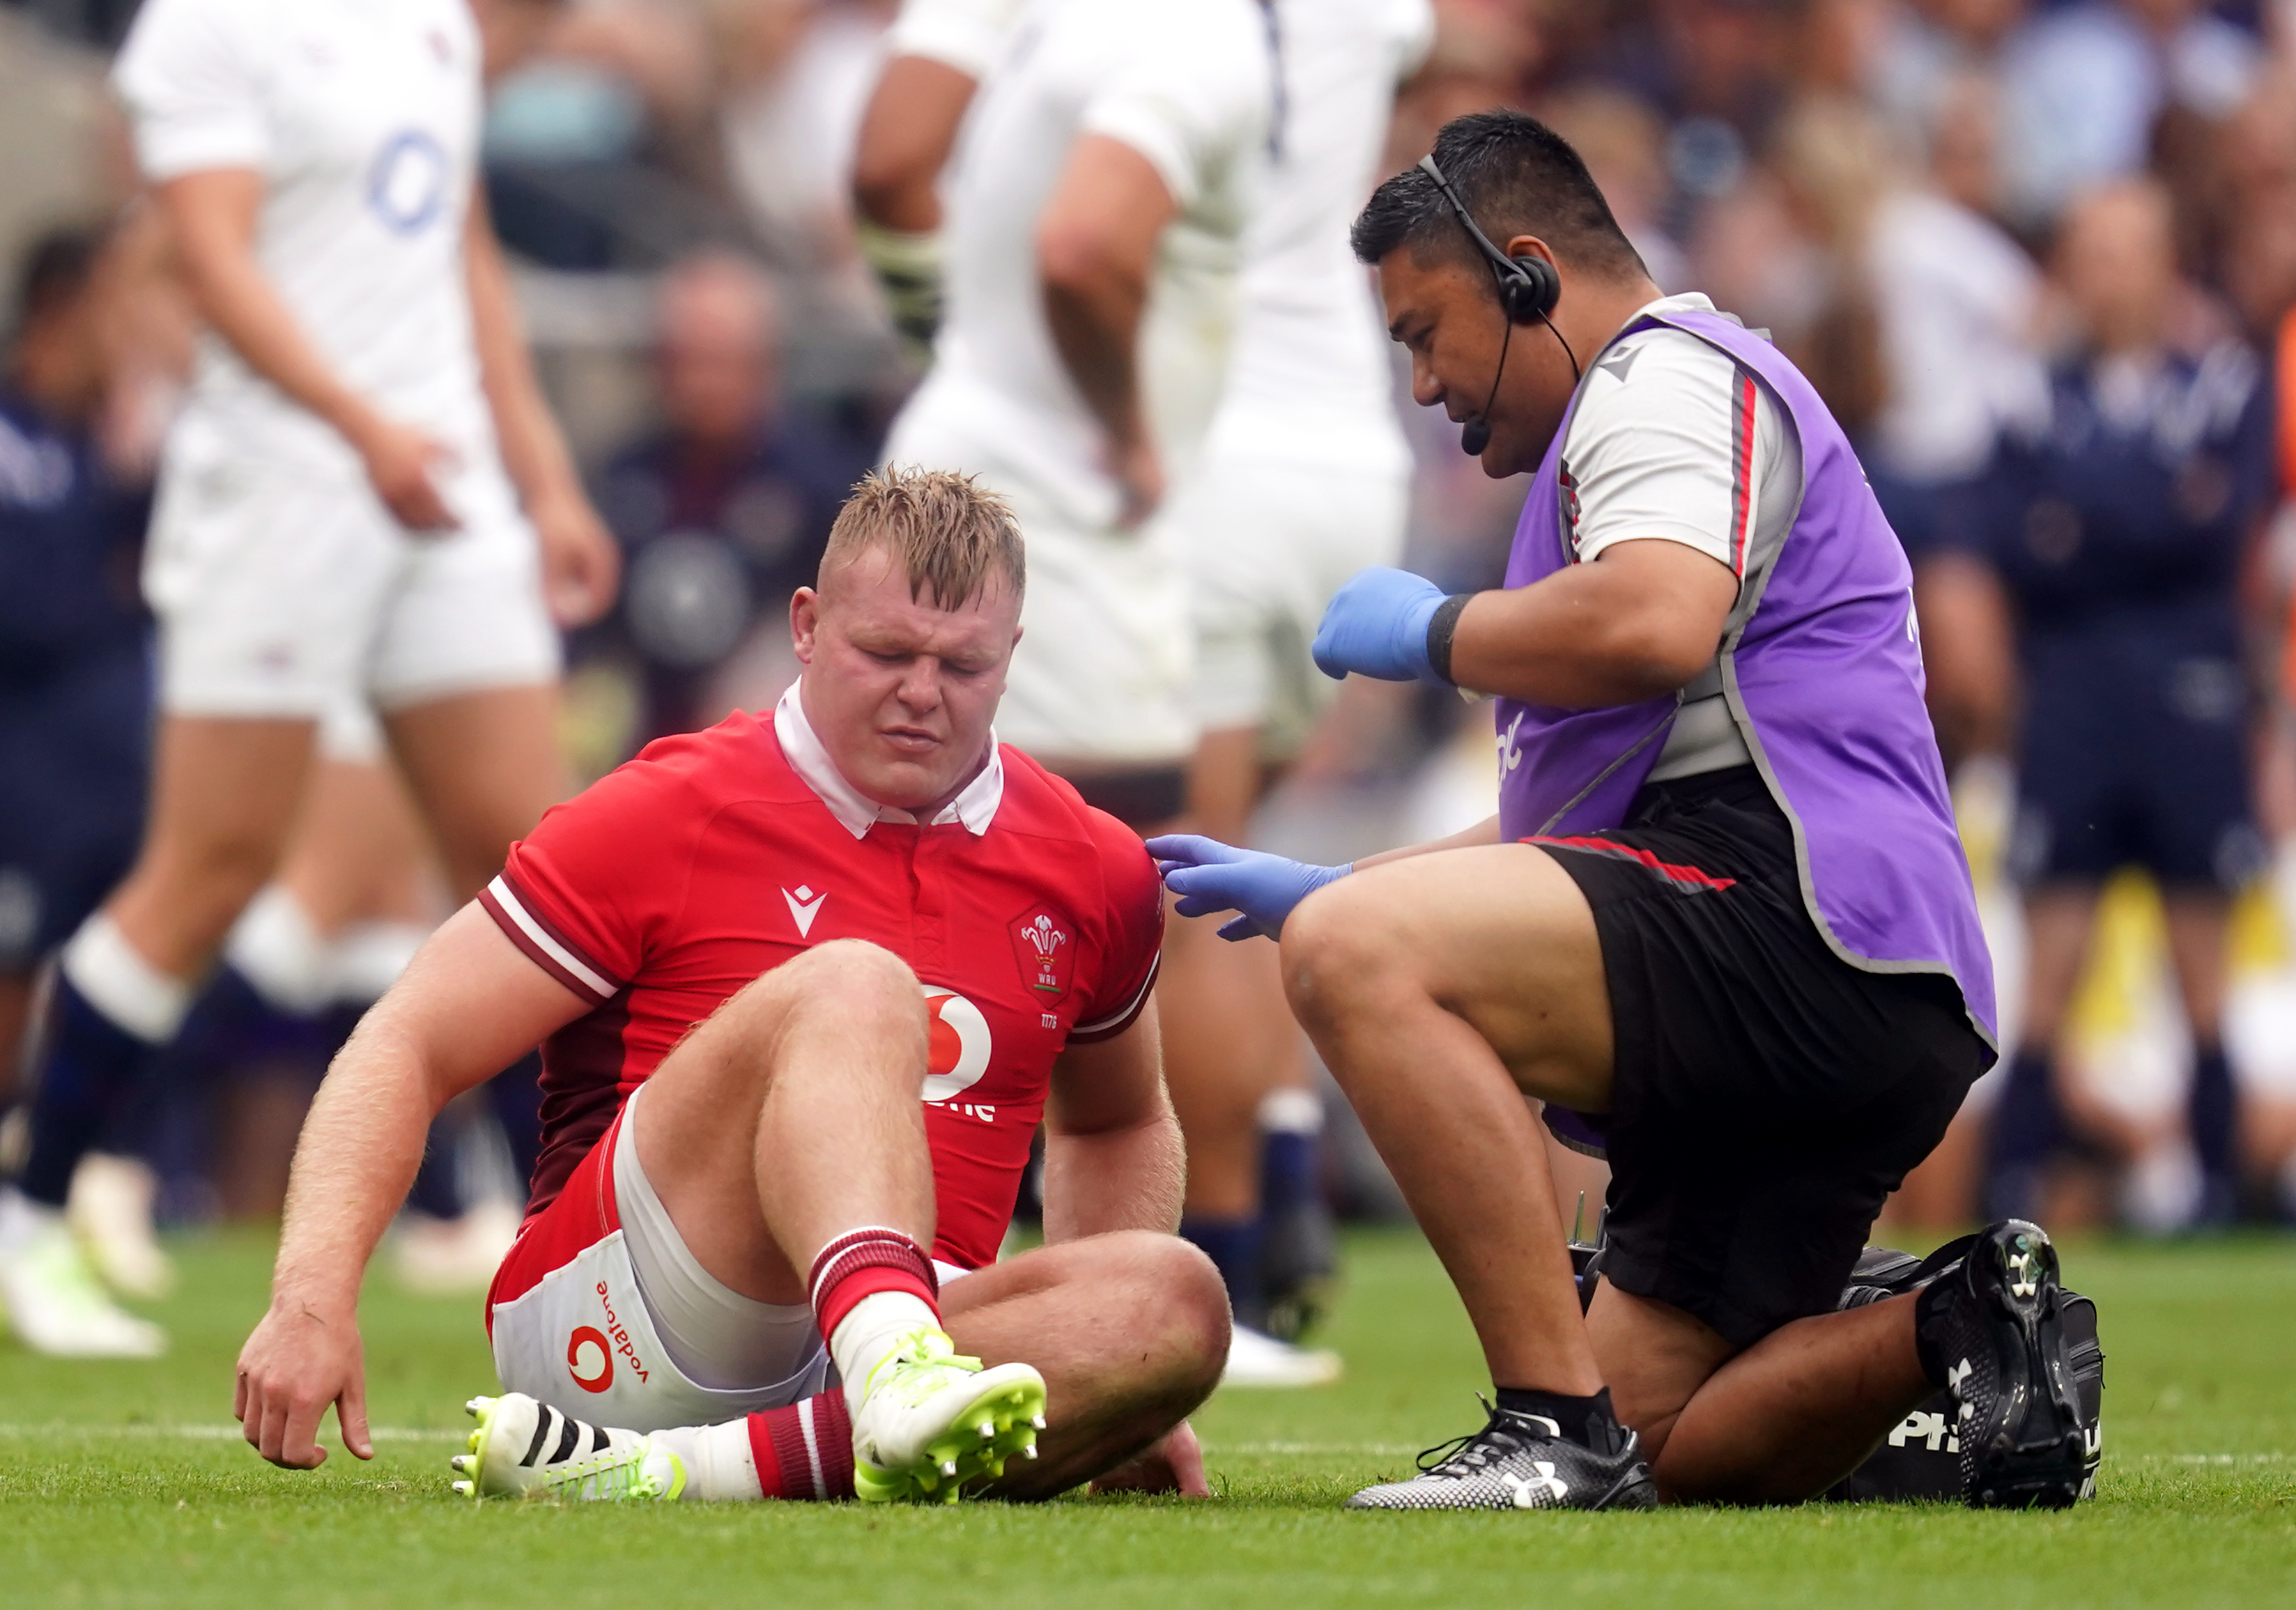 Dewi Lake is an injury concern for Wales